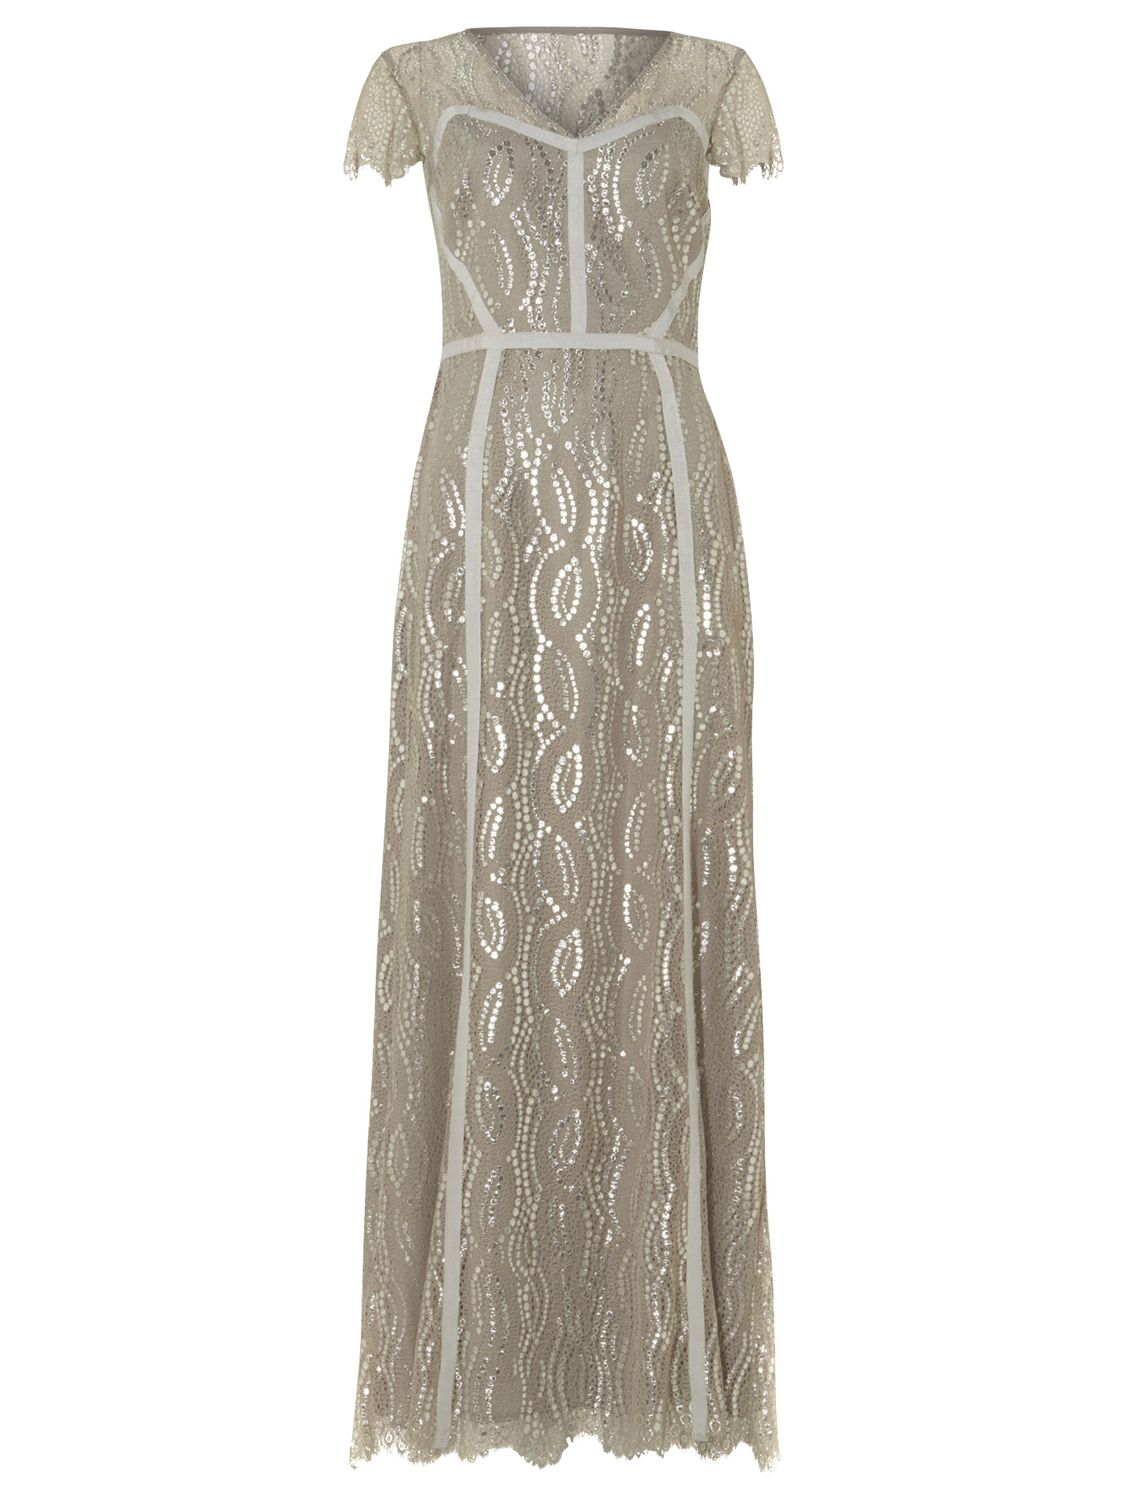 Phase Eight Collection 8 Hali Lace Dress, Silver